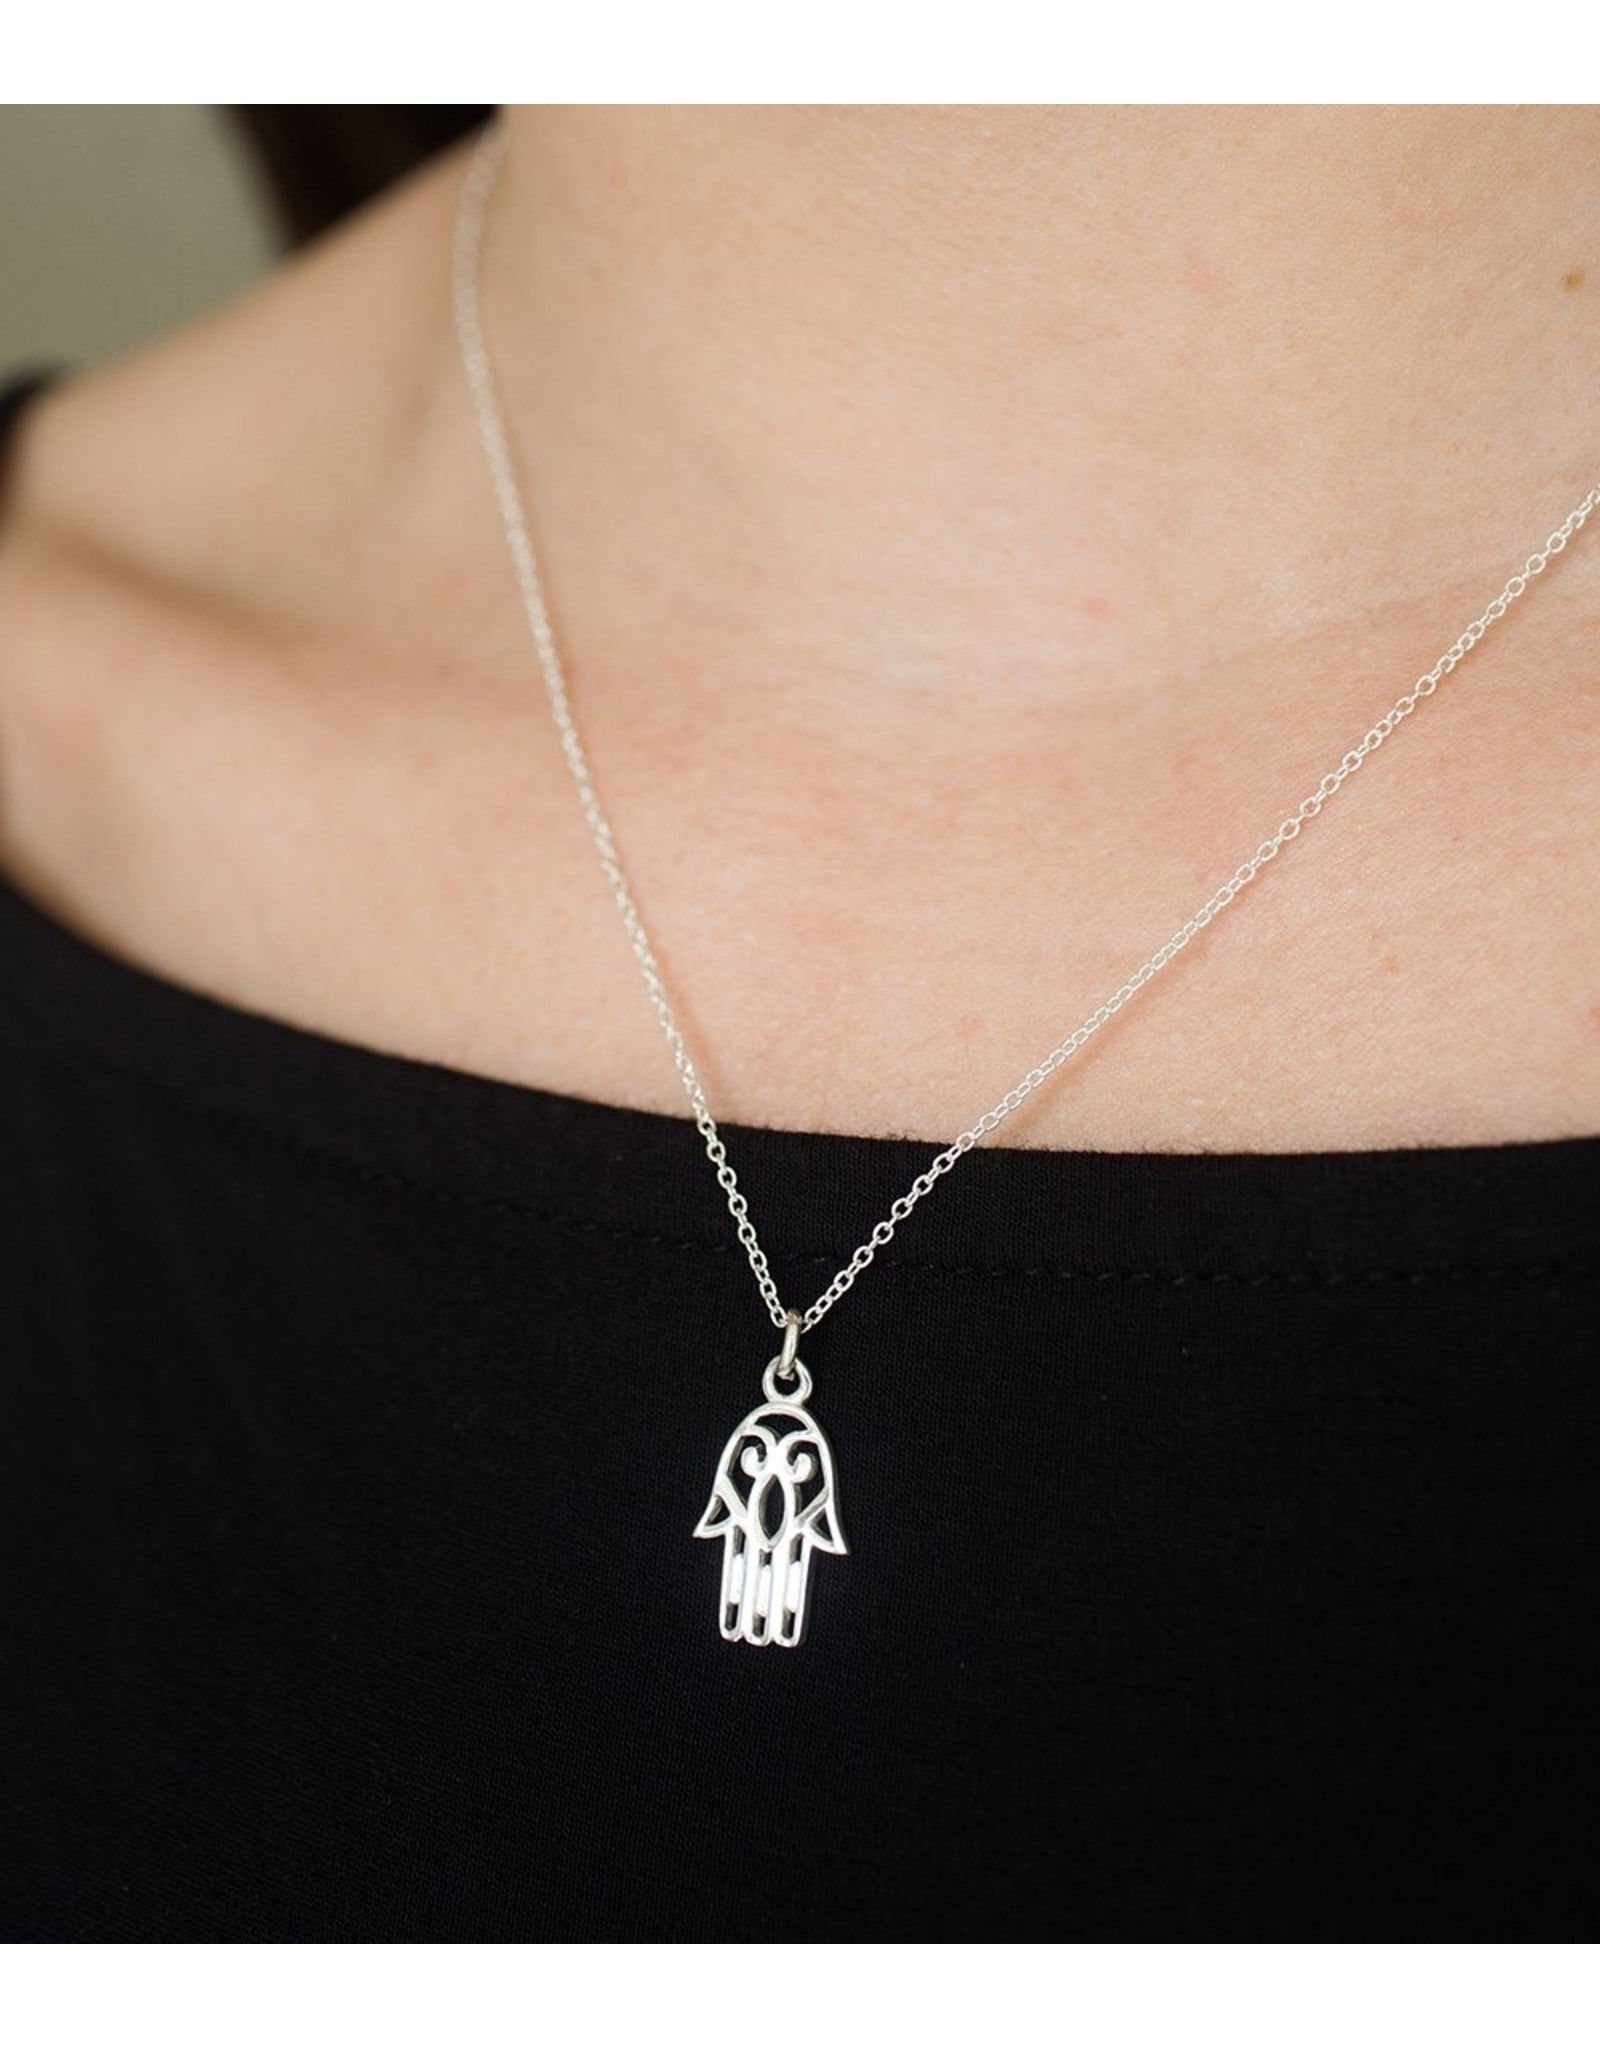 Sterling Silver charm of hamsa hand on necklace, from India shown in closeup on model.